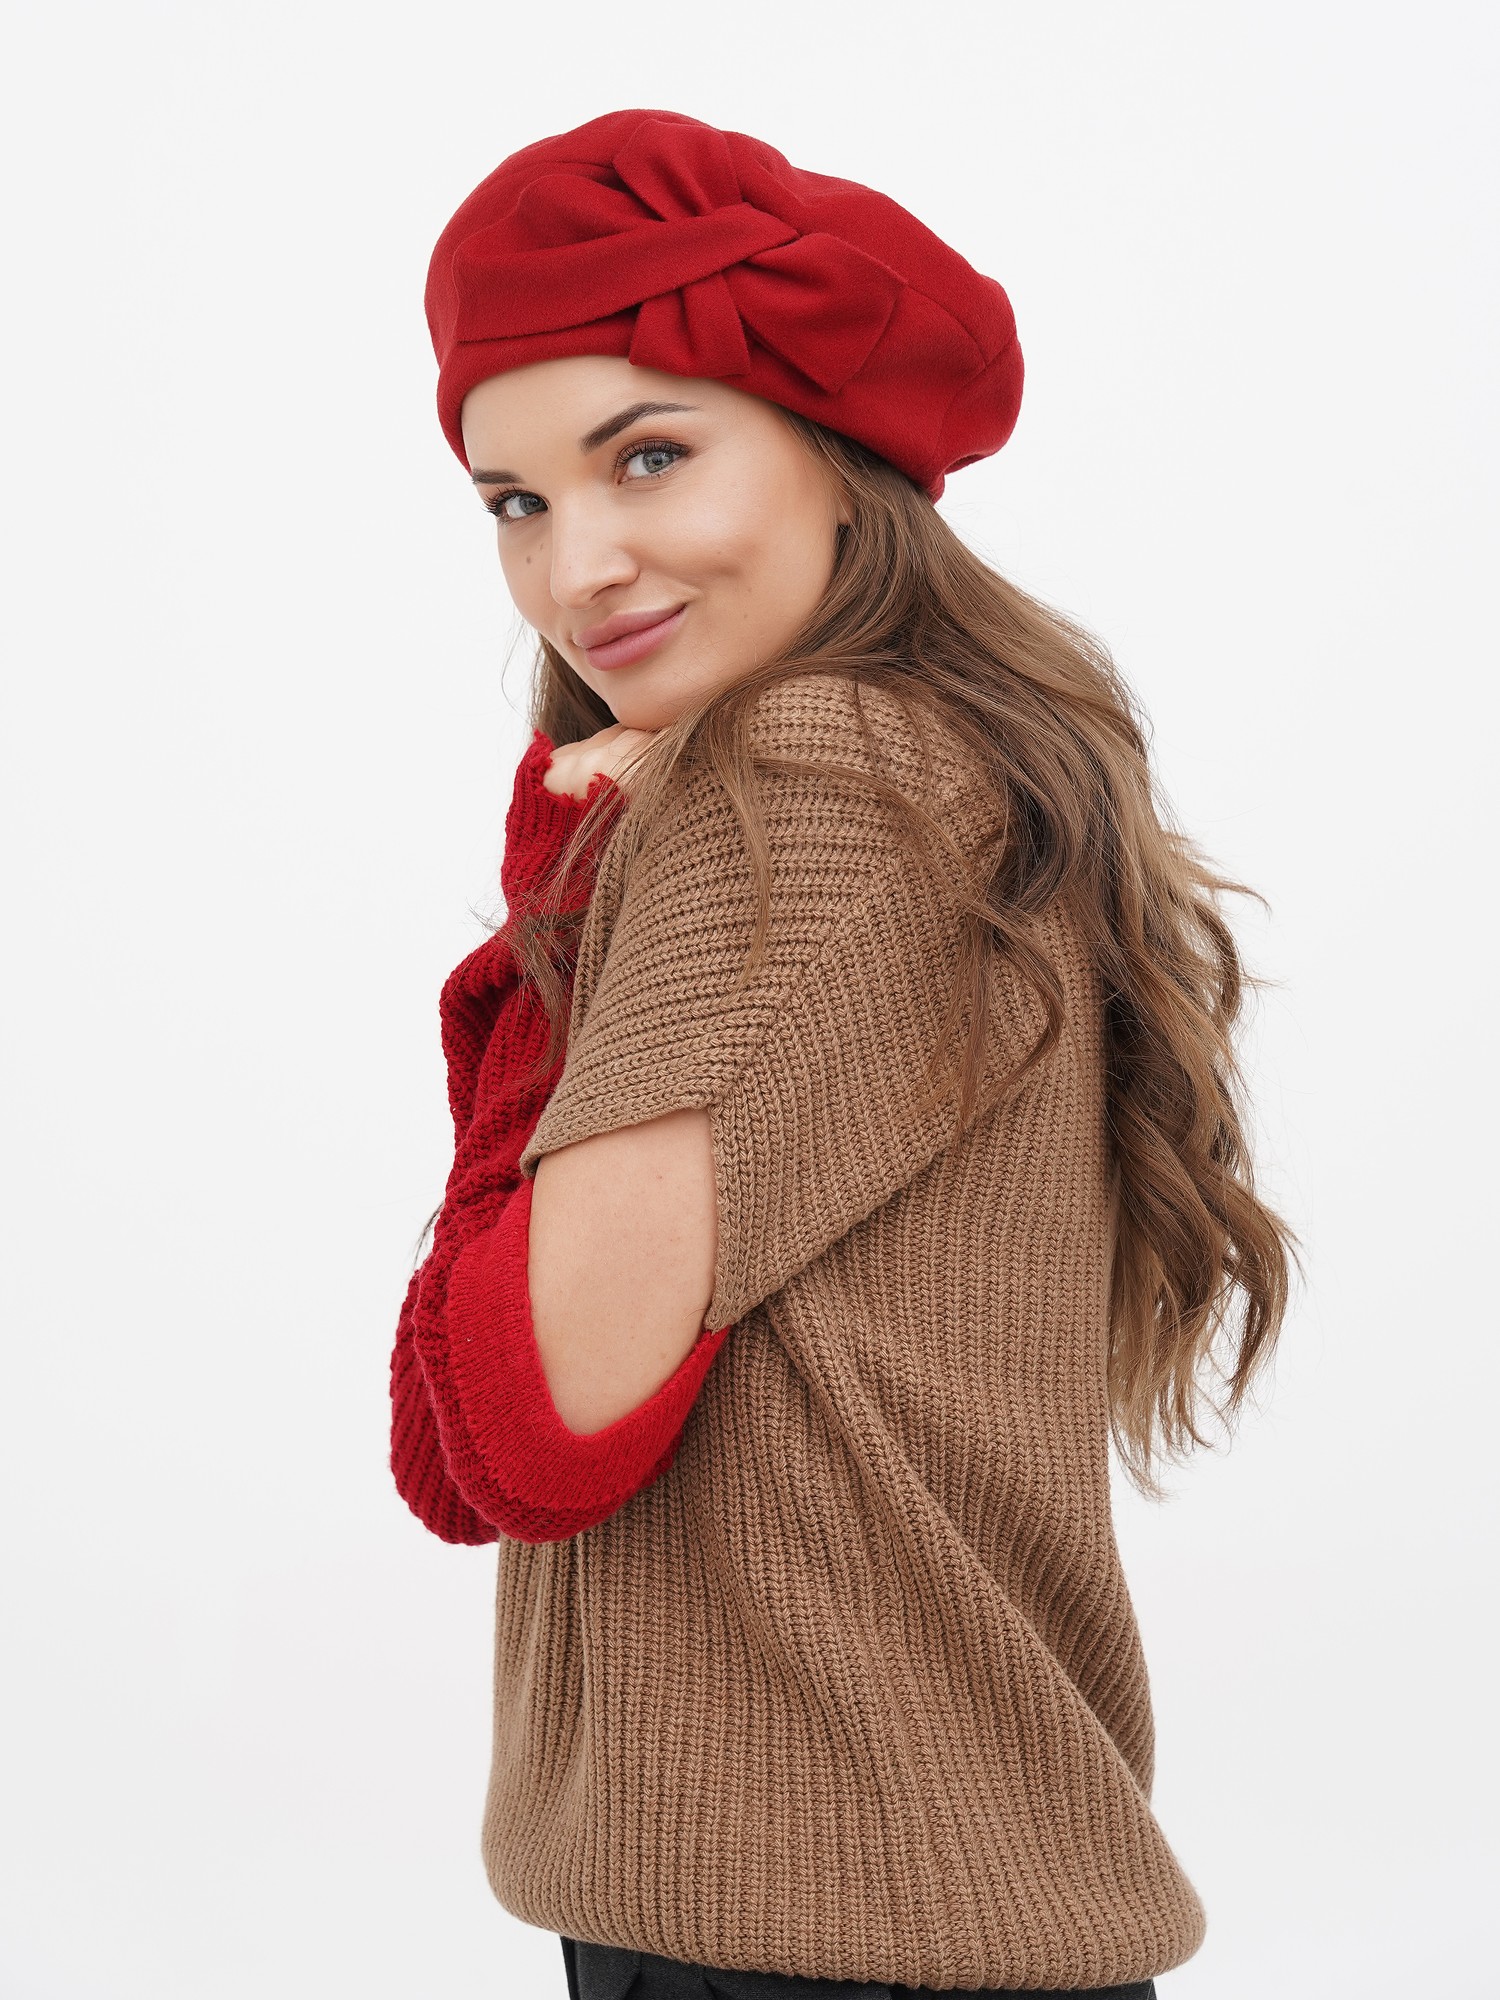 Women beret with a flower cashmere hat red